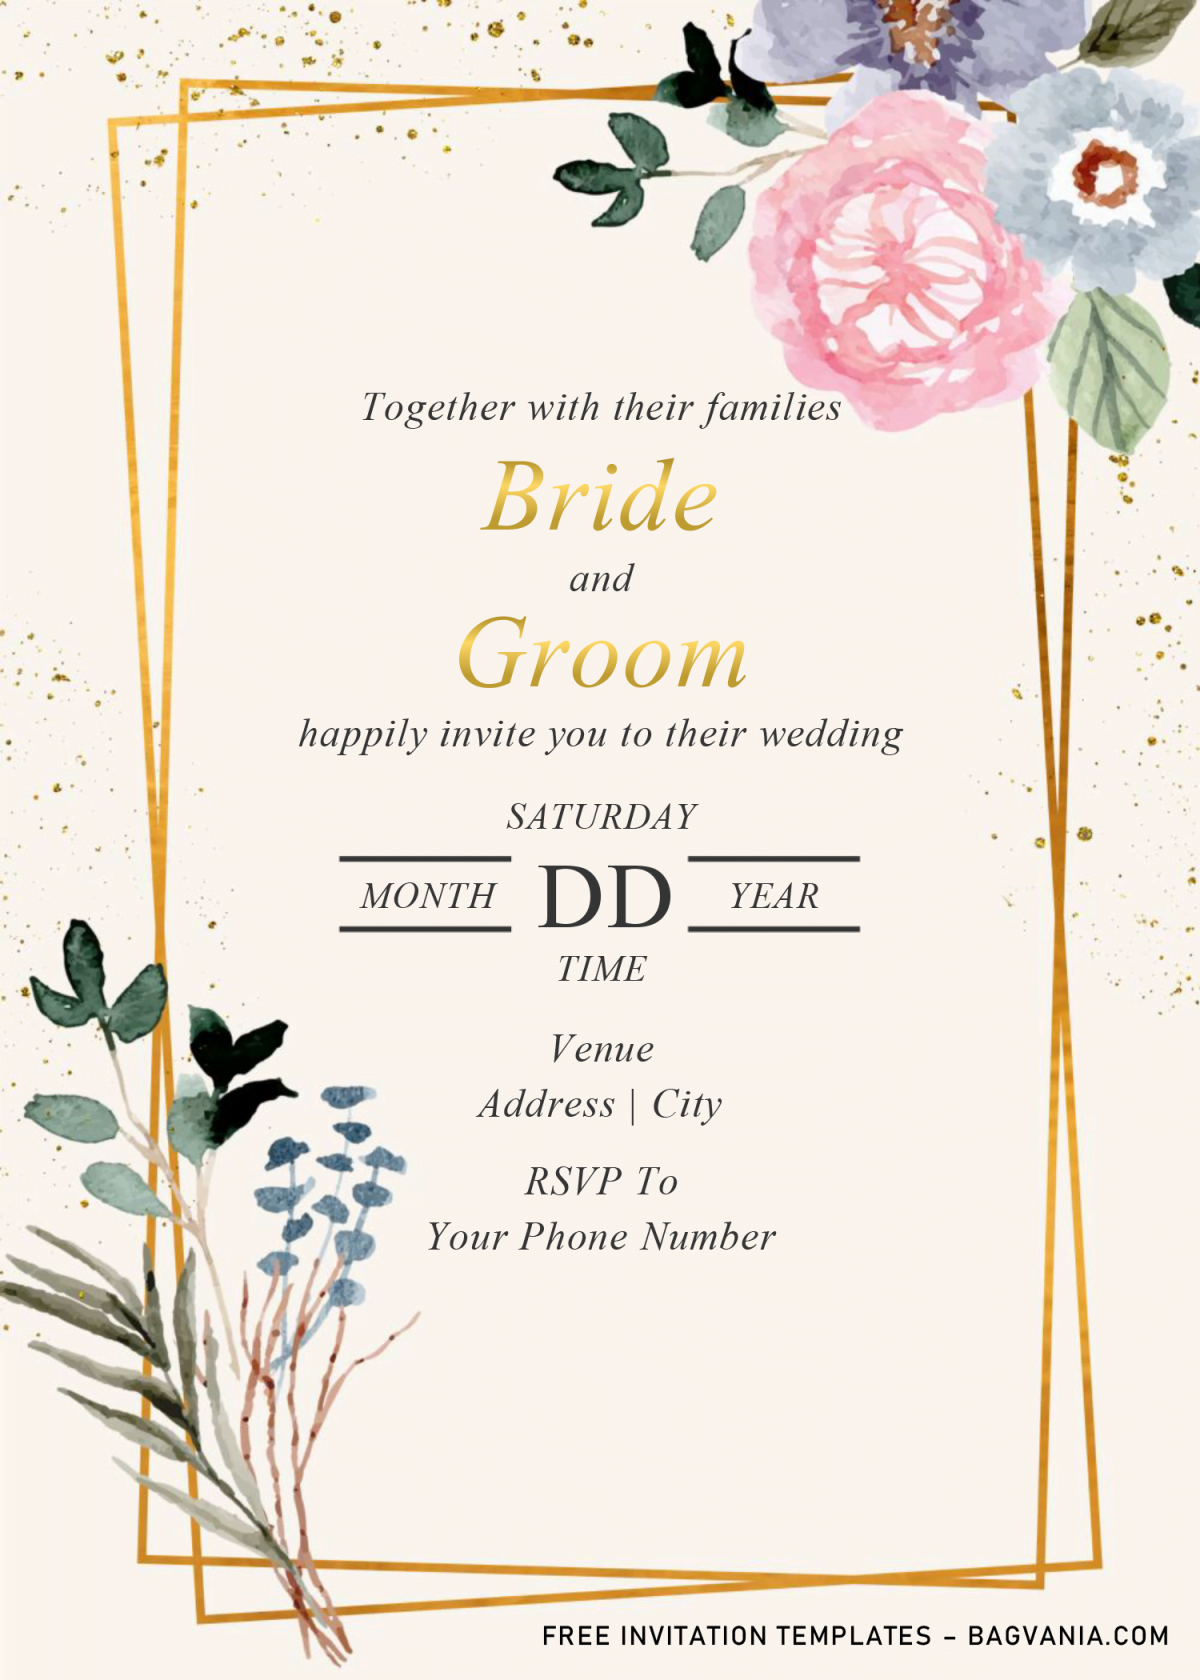 Floral & Geometric Invitation Templates - Editable With MS Word and has watercolor floral